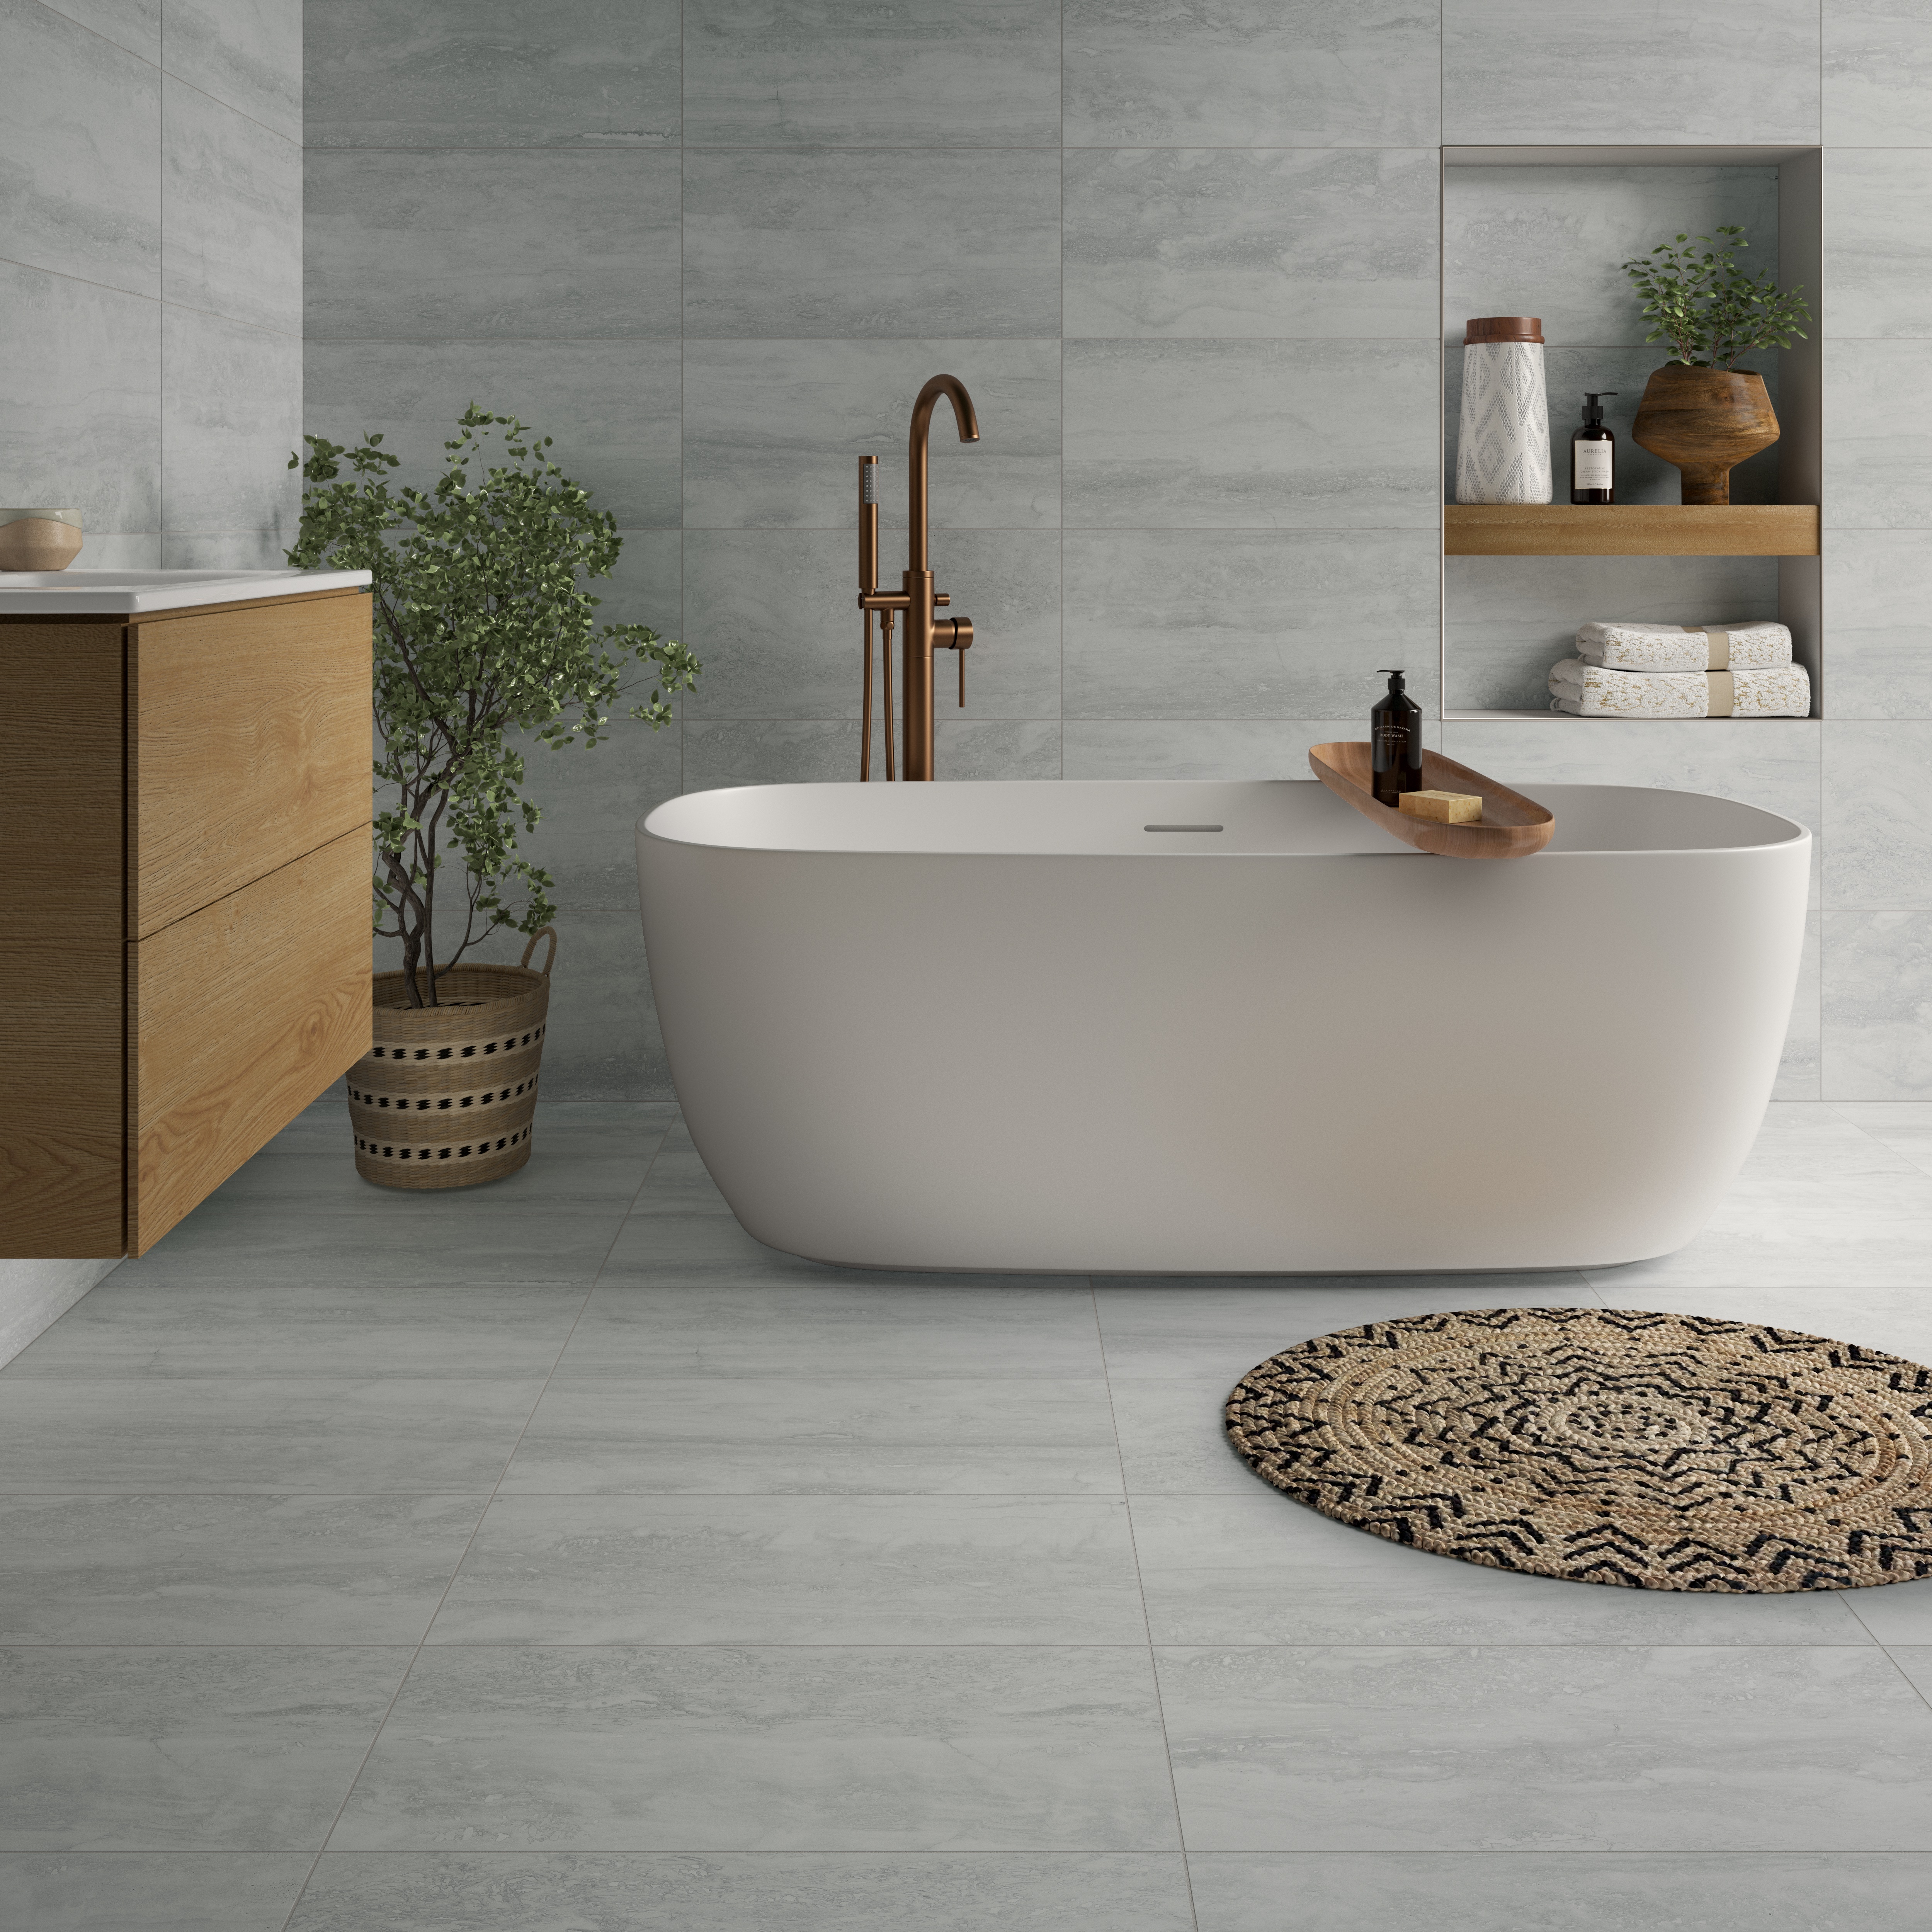 Image of Wickes Everest Ash Porcelain Wall & Floor Tile - 600 x 300mm